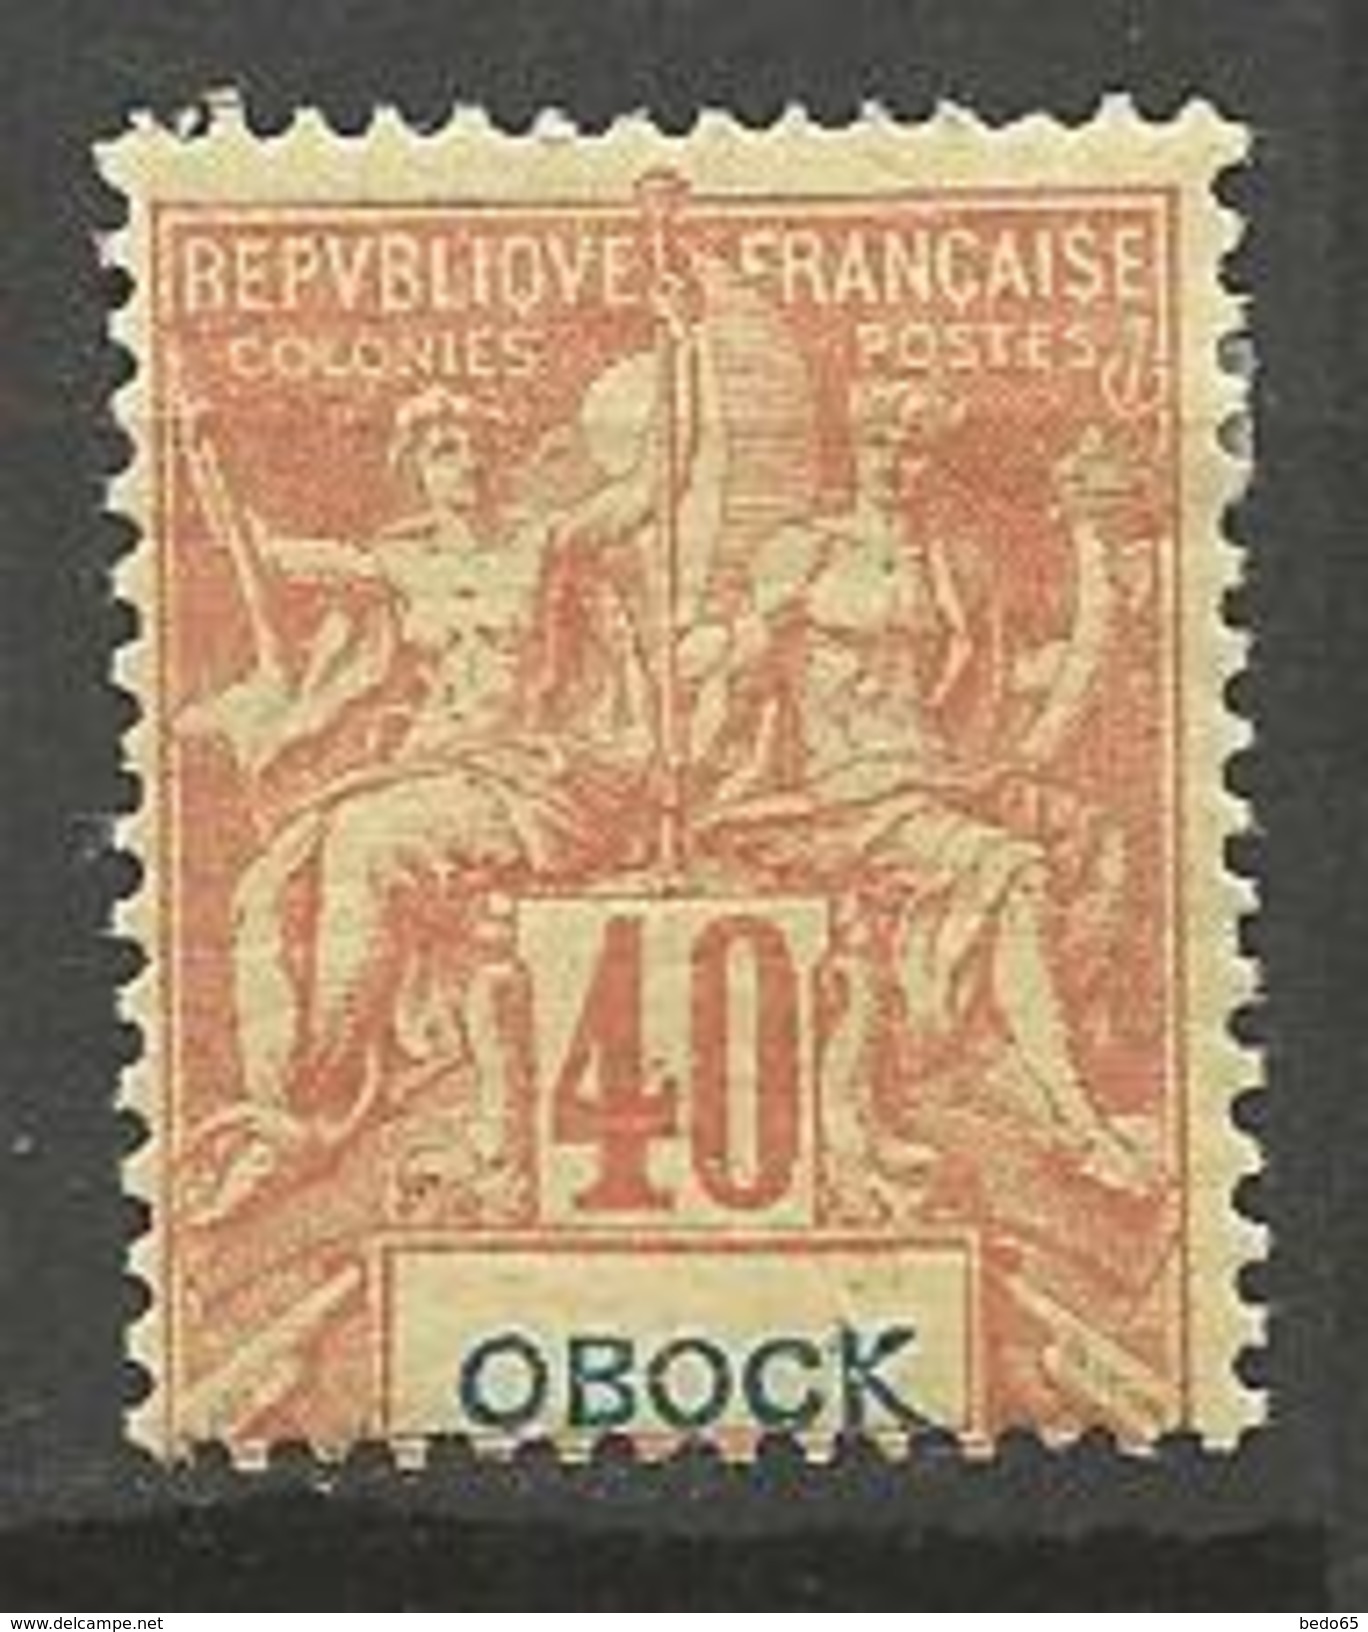 OBOCK N° 41 NEUF*  CHARNIERE TB  / MH - Unused Stamps